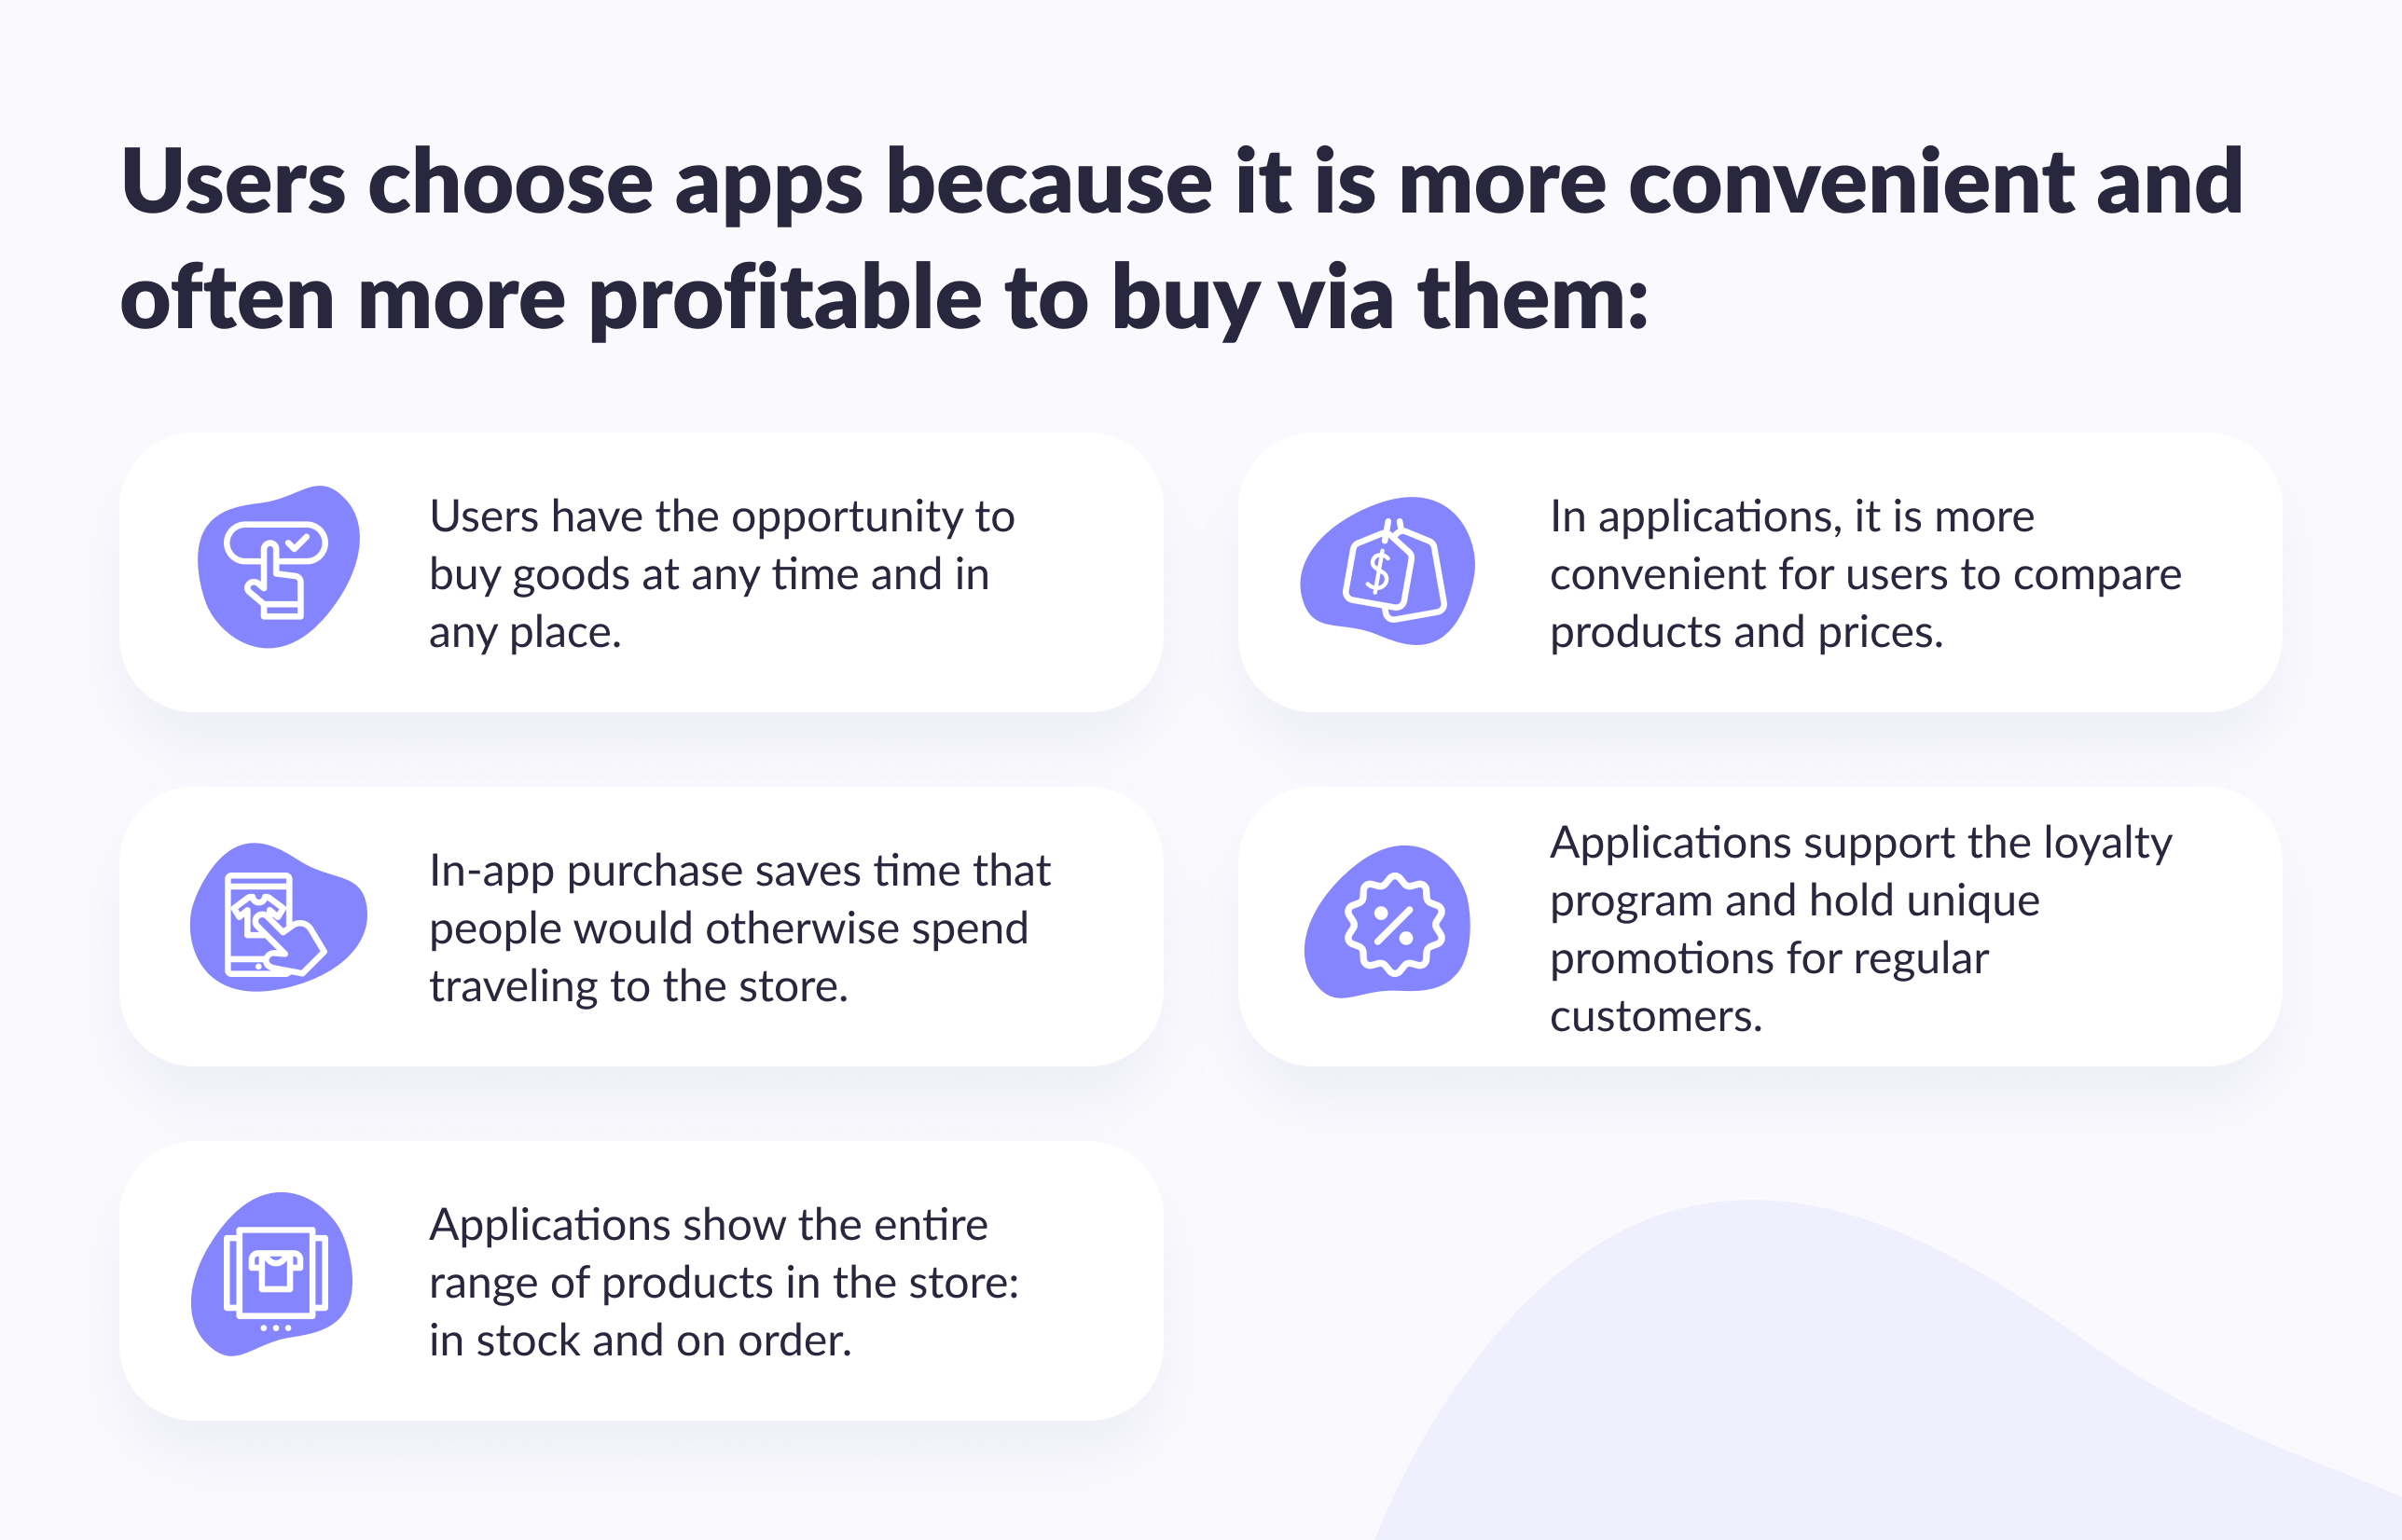 Why users choose apps